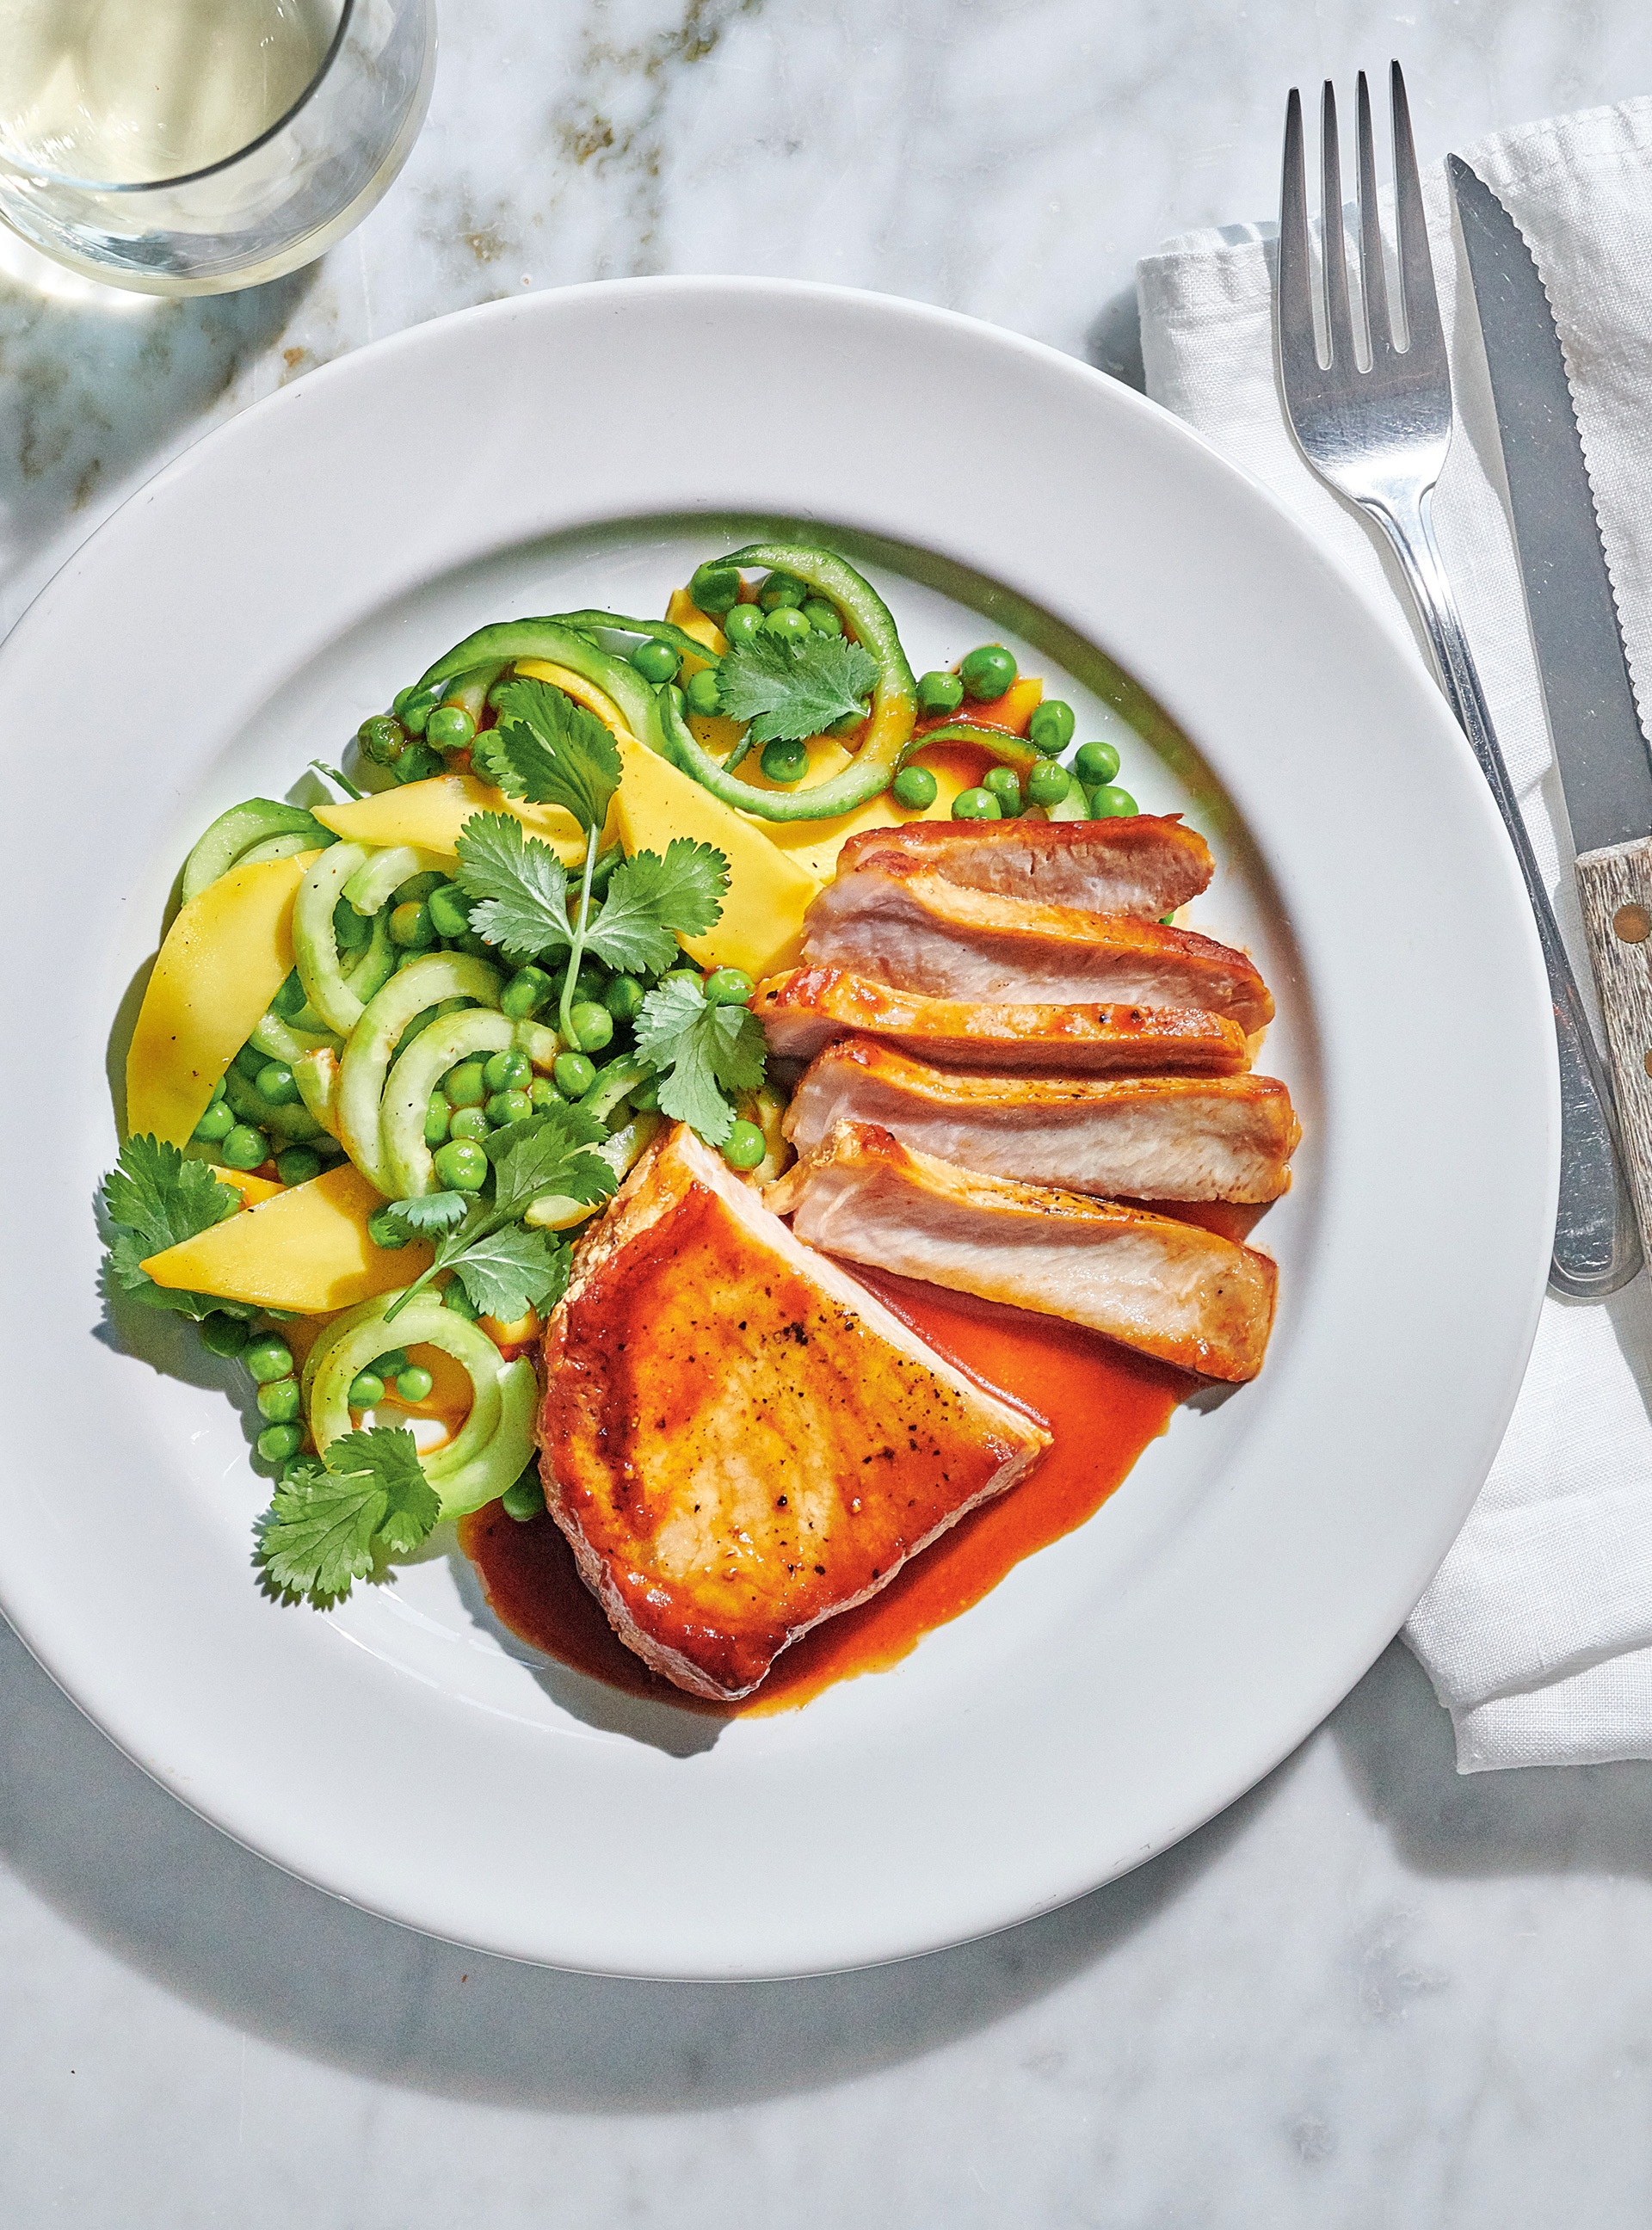 Sweet and Sour Pork Chops with Peas, Cucumber and Mango